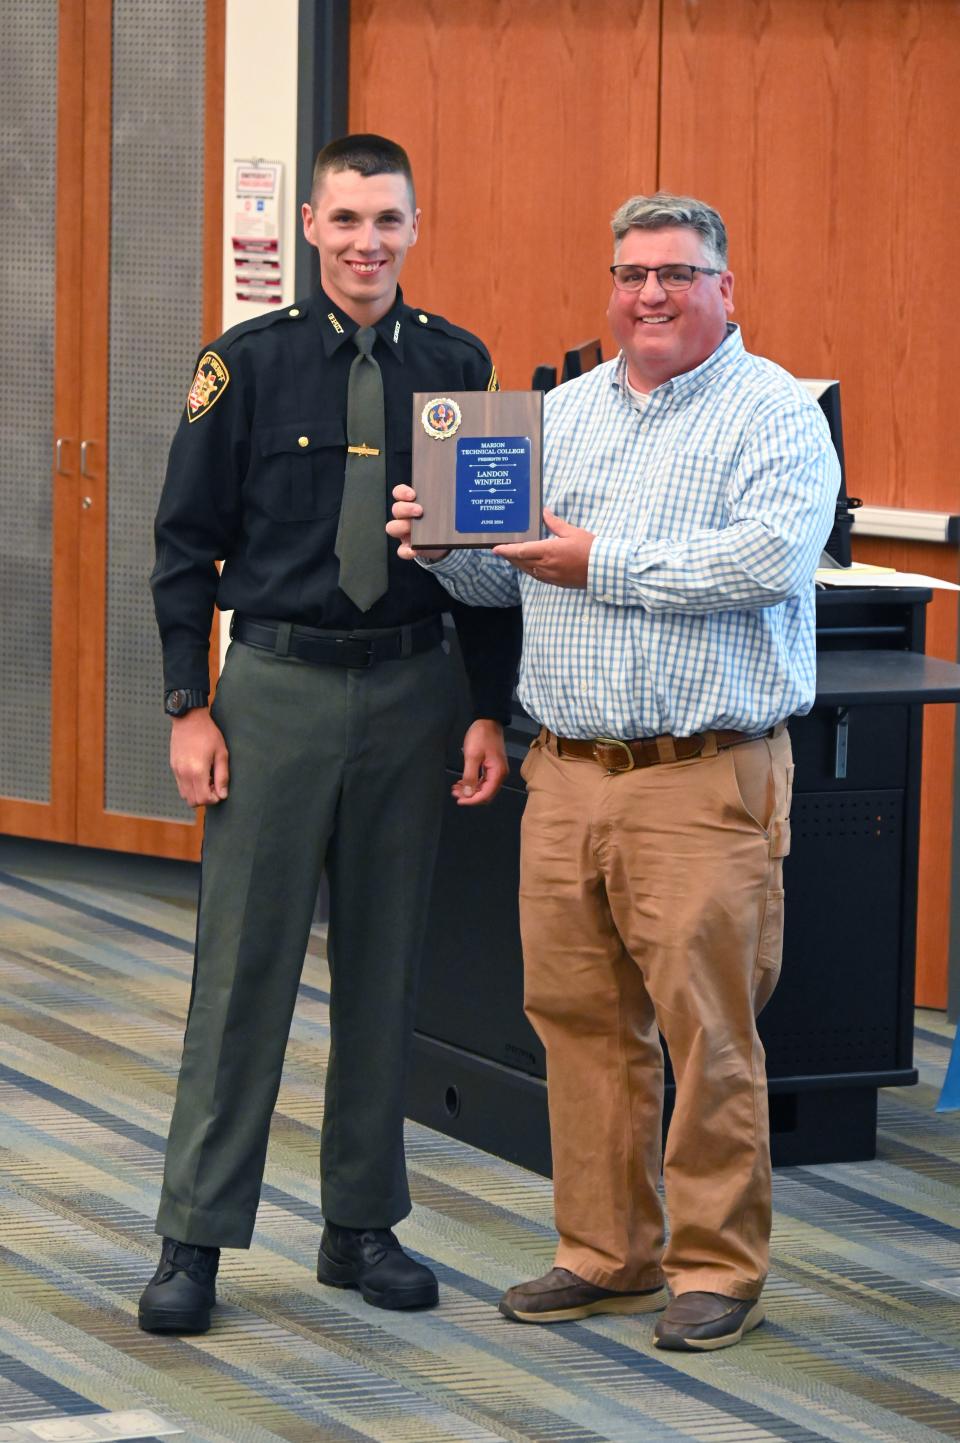 Landon Winfield received the Top Physical Fitness Award from Commander Greg Perry at the Ohio Peace Officer's Training Academy graduation in June. His father, Brandy, was a member of the second class at Marion Tech. His grandfather and uncle also served in local law enforcement.